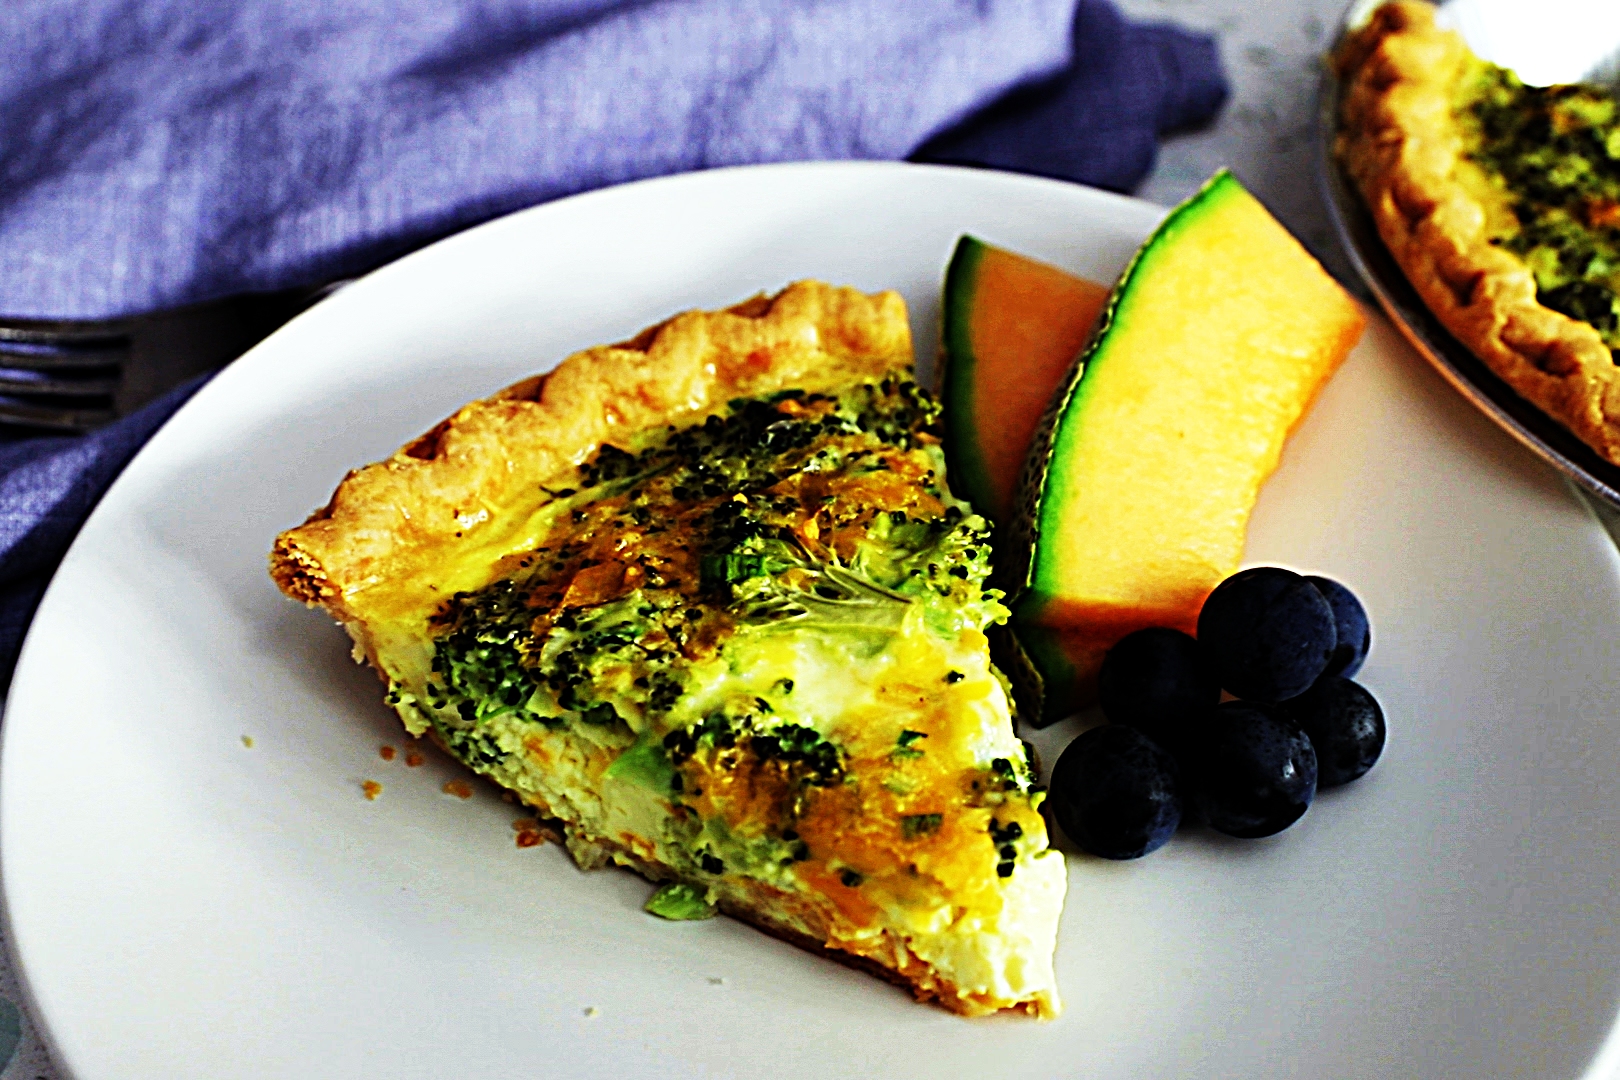 Stupid-Easy Recipe for Broccoli and Cheese Quiche (#1 Top-Rated)